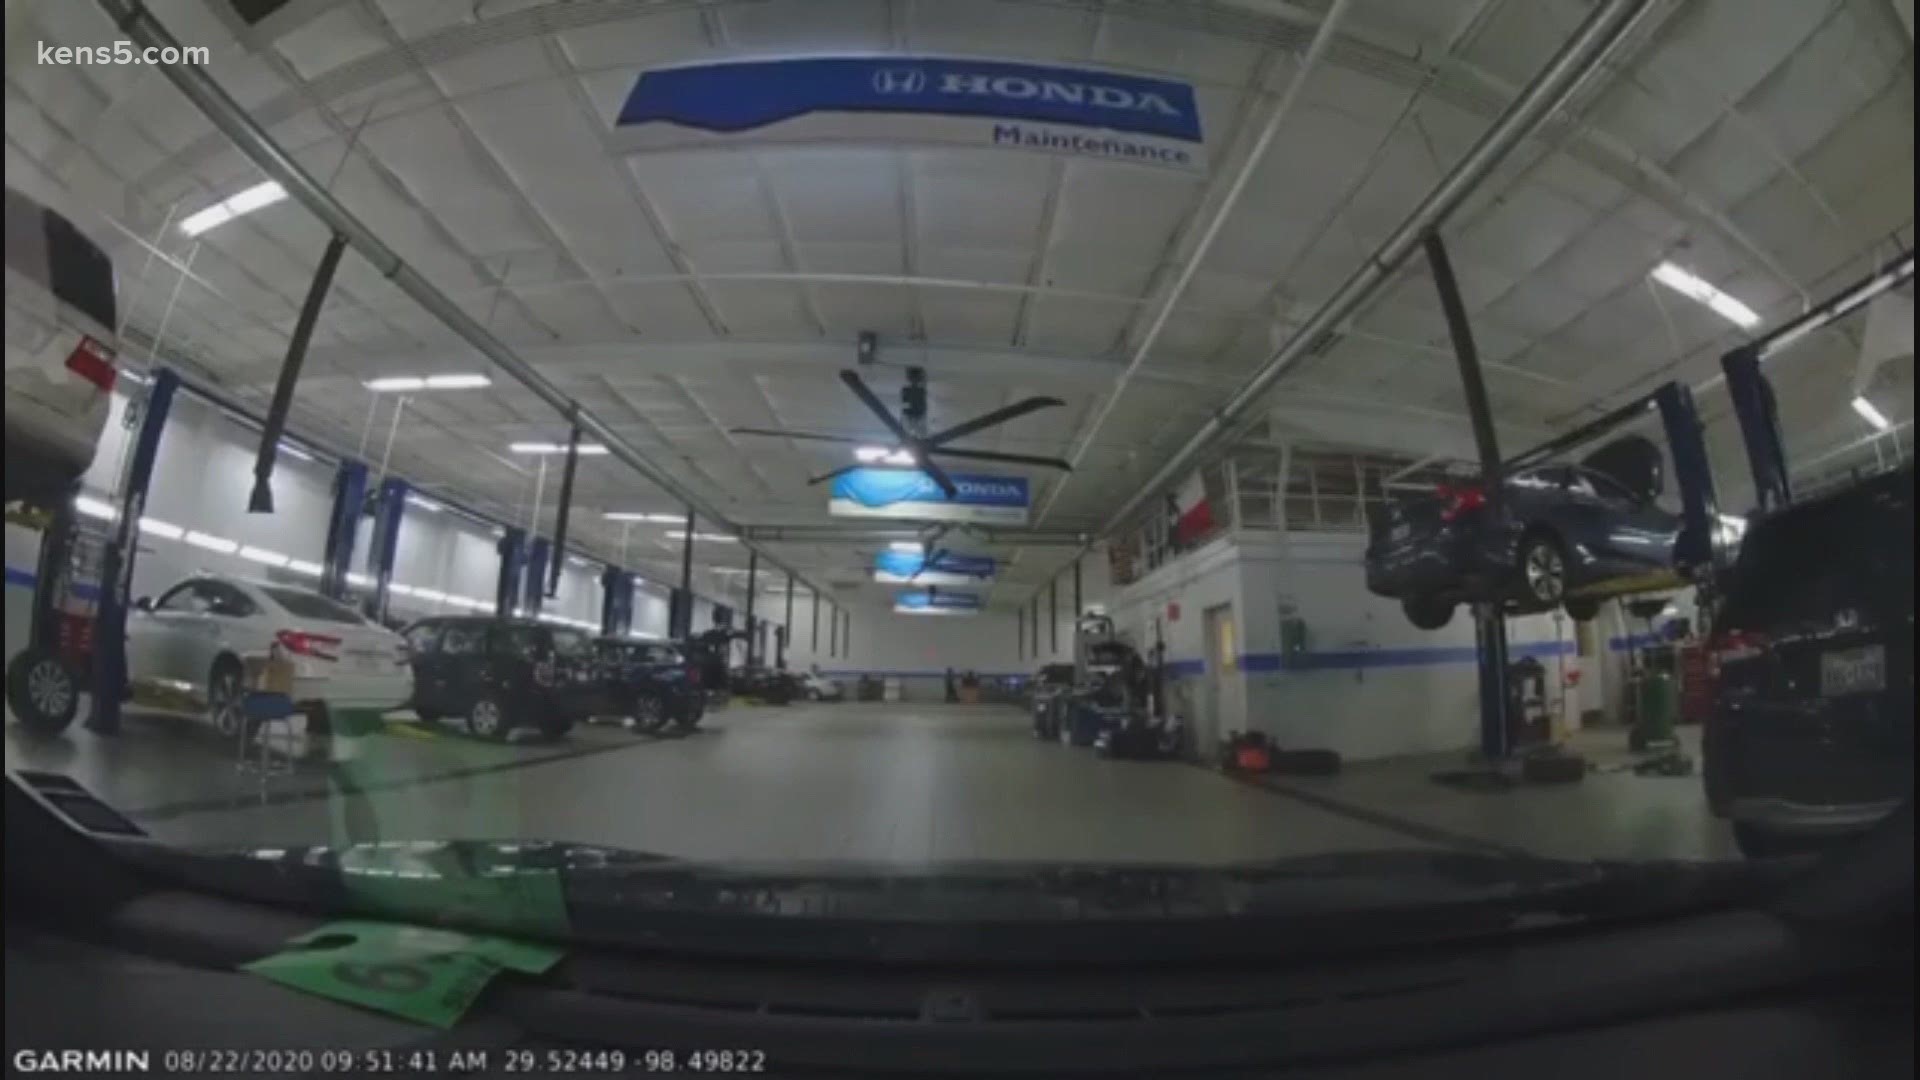 A San Antonio car dealership customer says he declined additional service on his vehicle. What happened next was caught on video and is going viral.